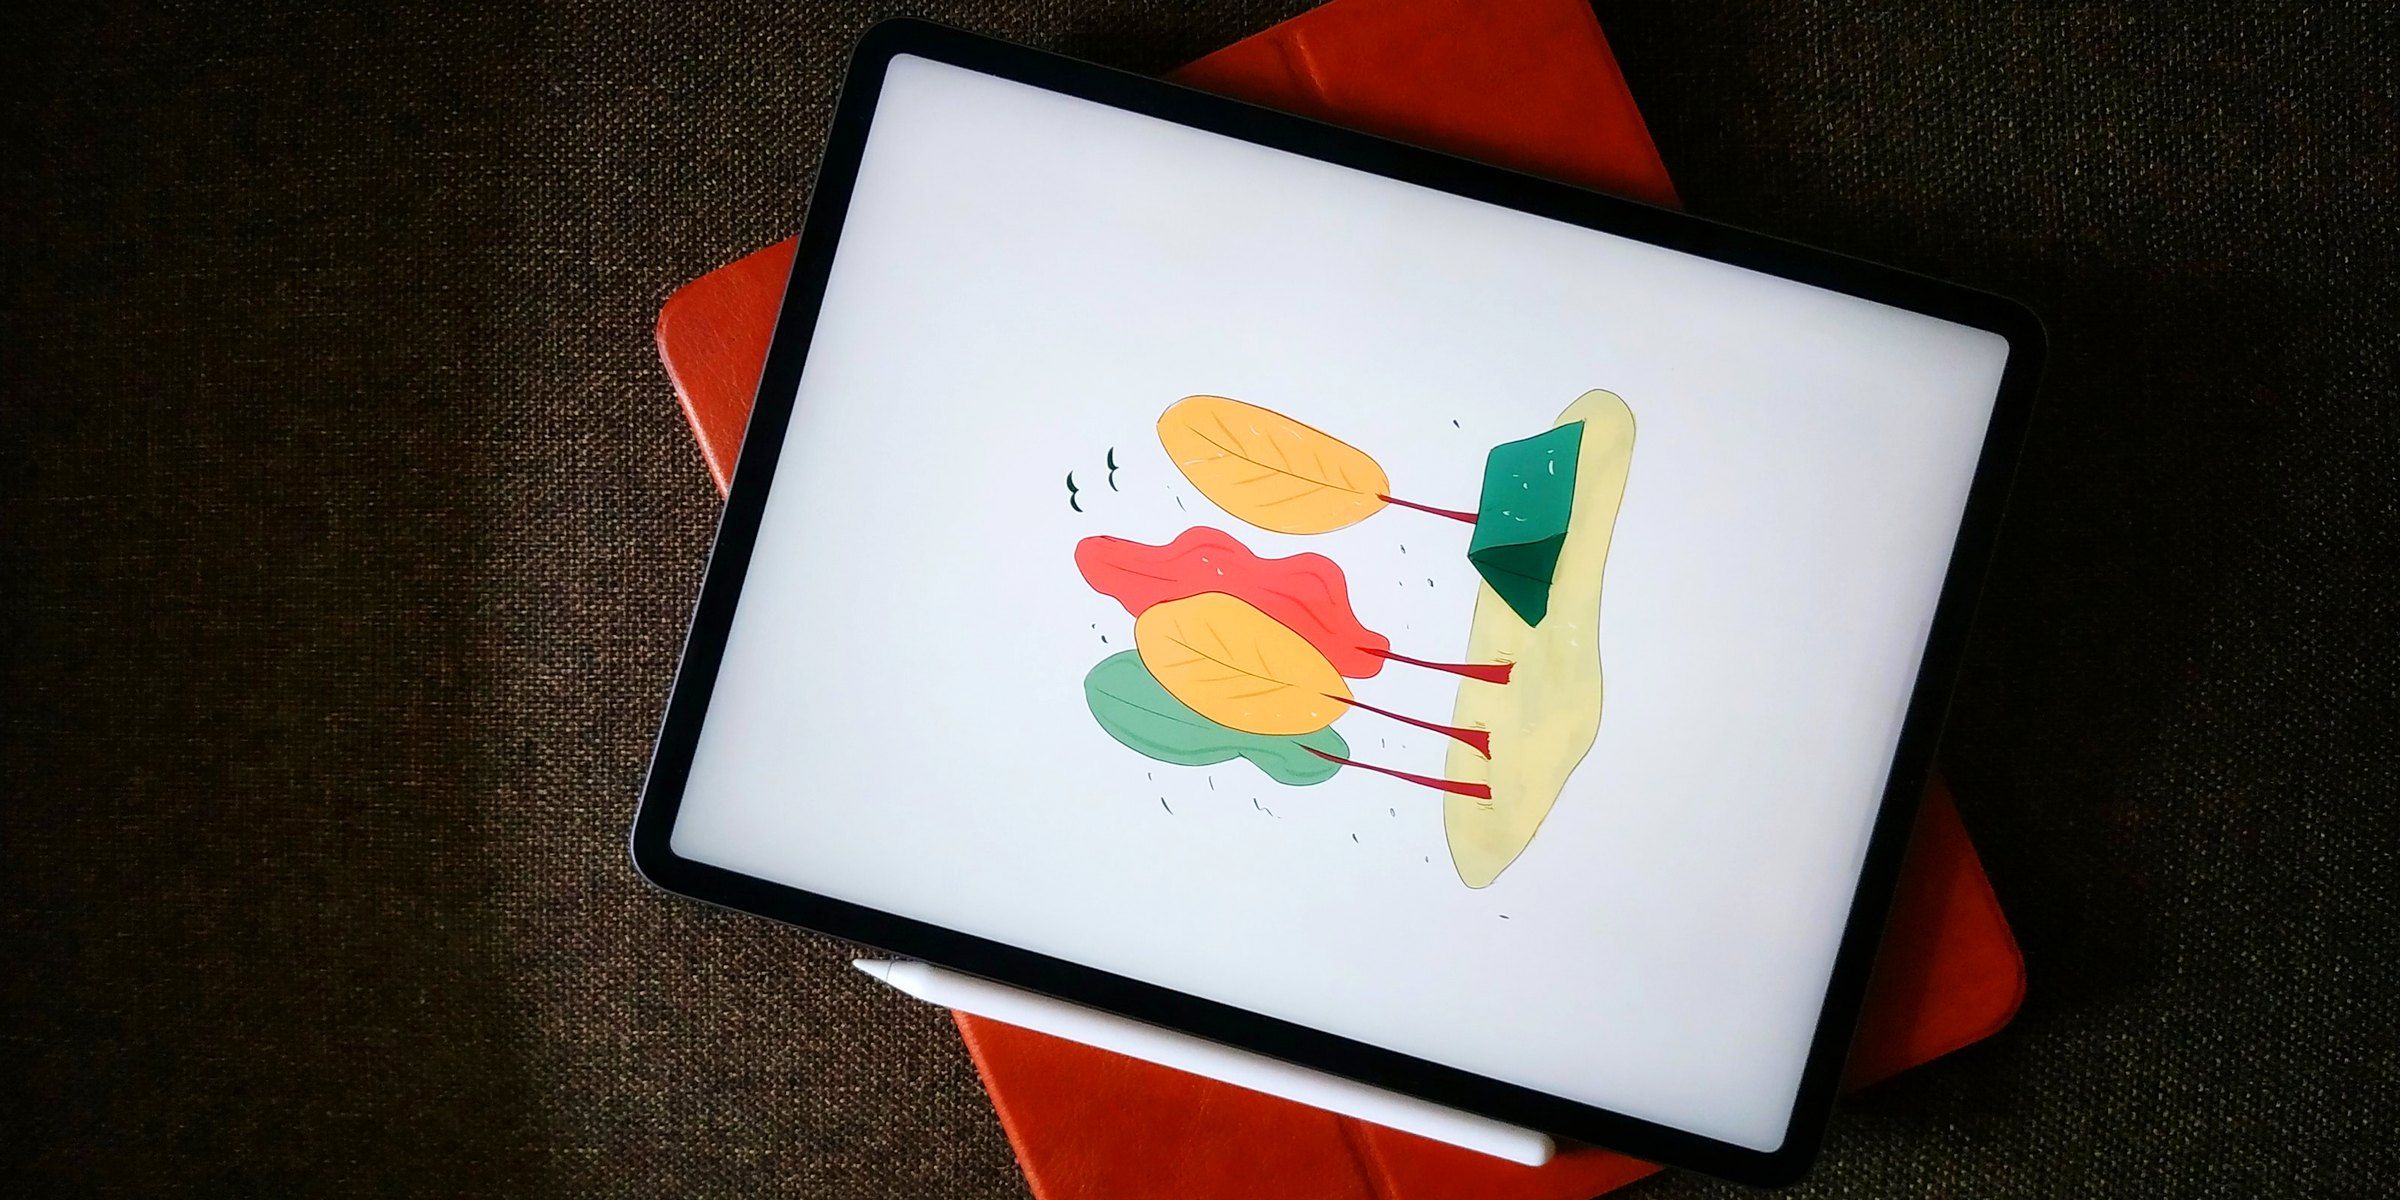 iPad Pro Planned Upgrade For 2023 or 2024